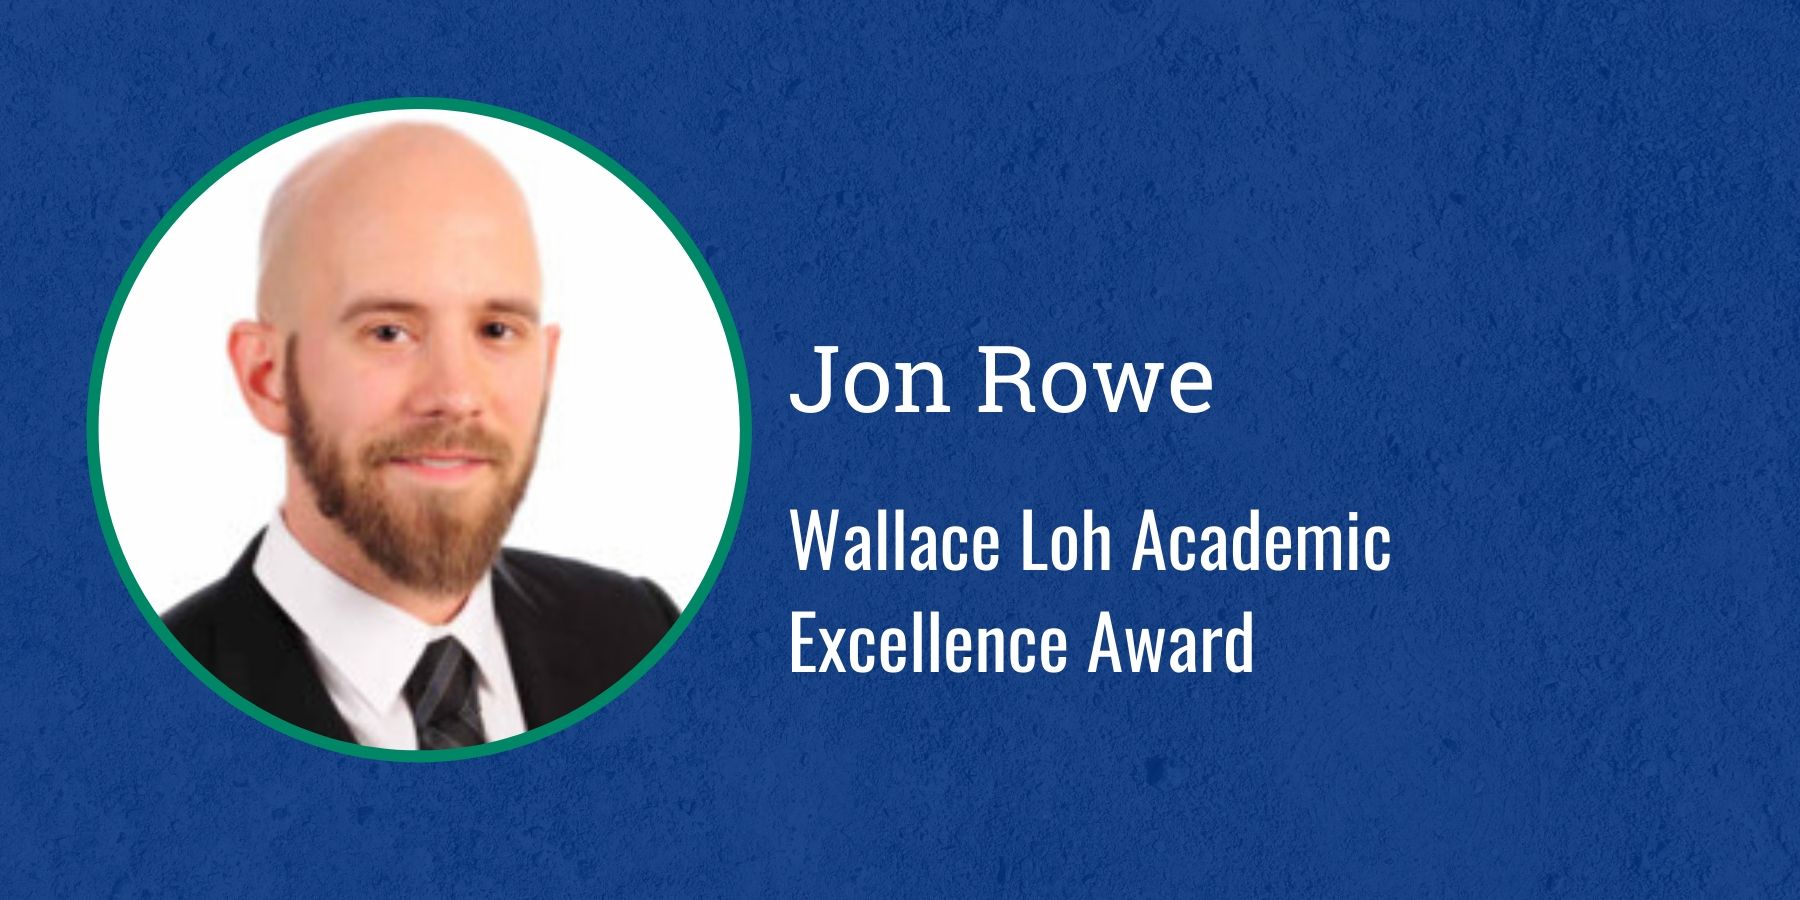 Picture of Jon Rowe and text Wallace Loh Academic Excellence Award